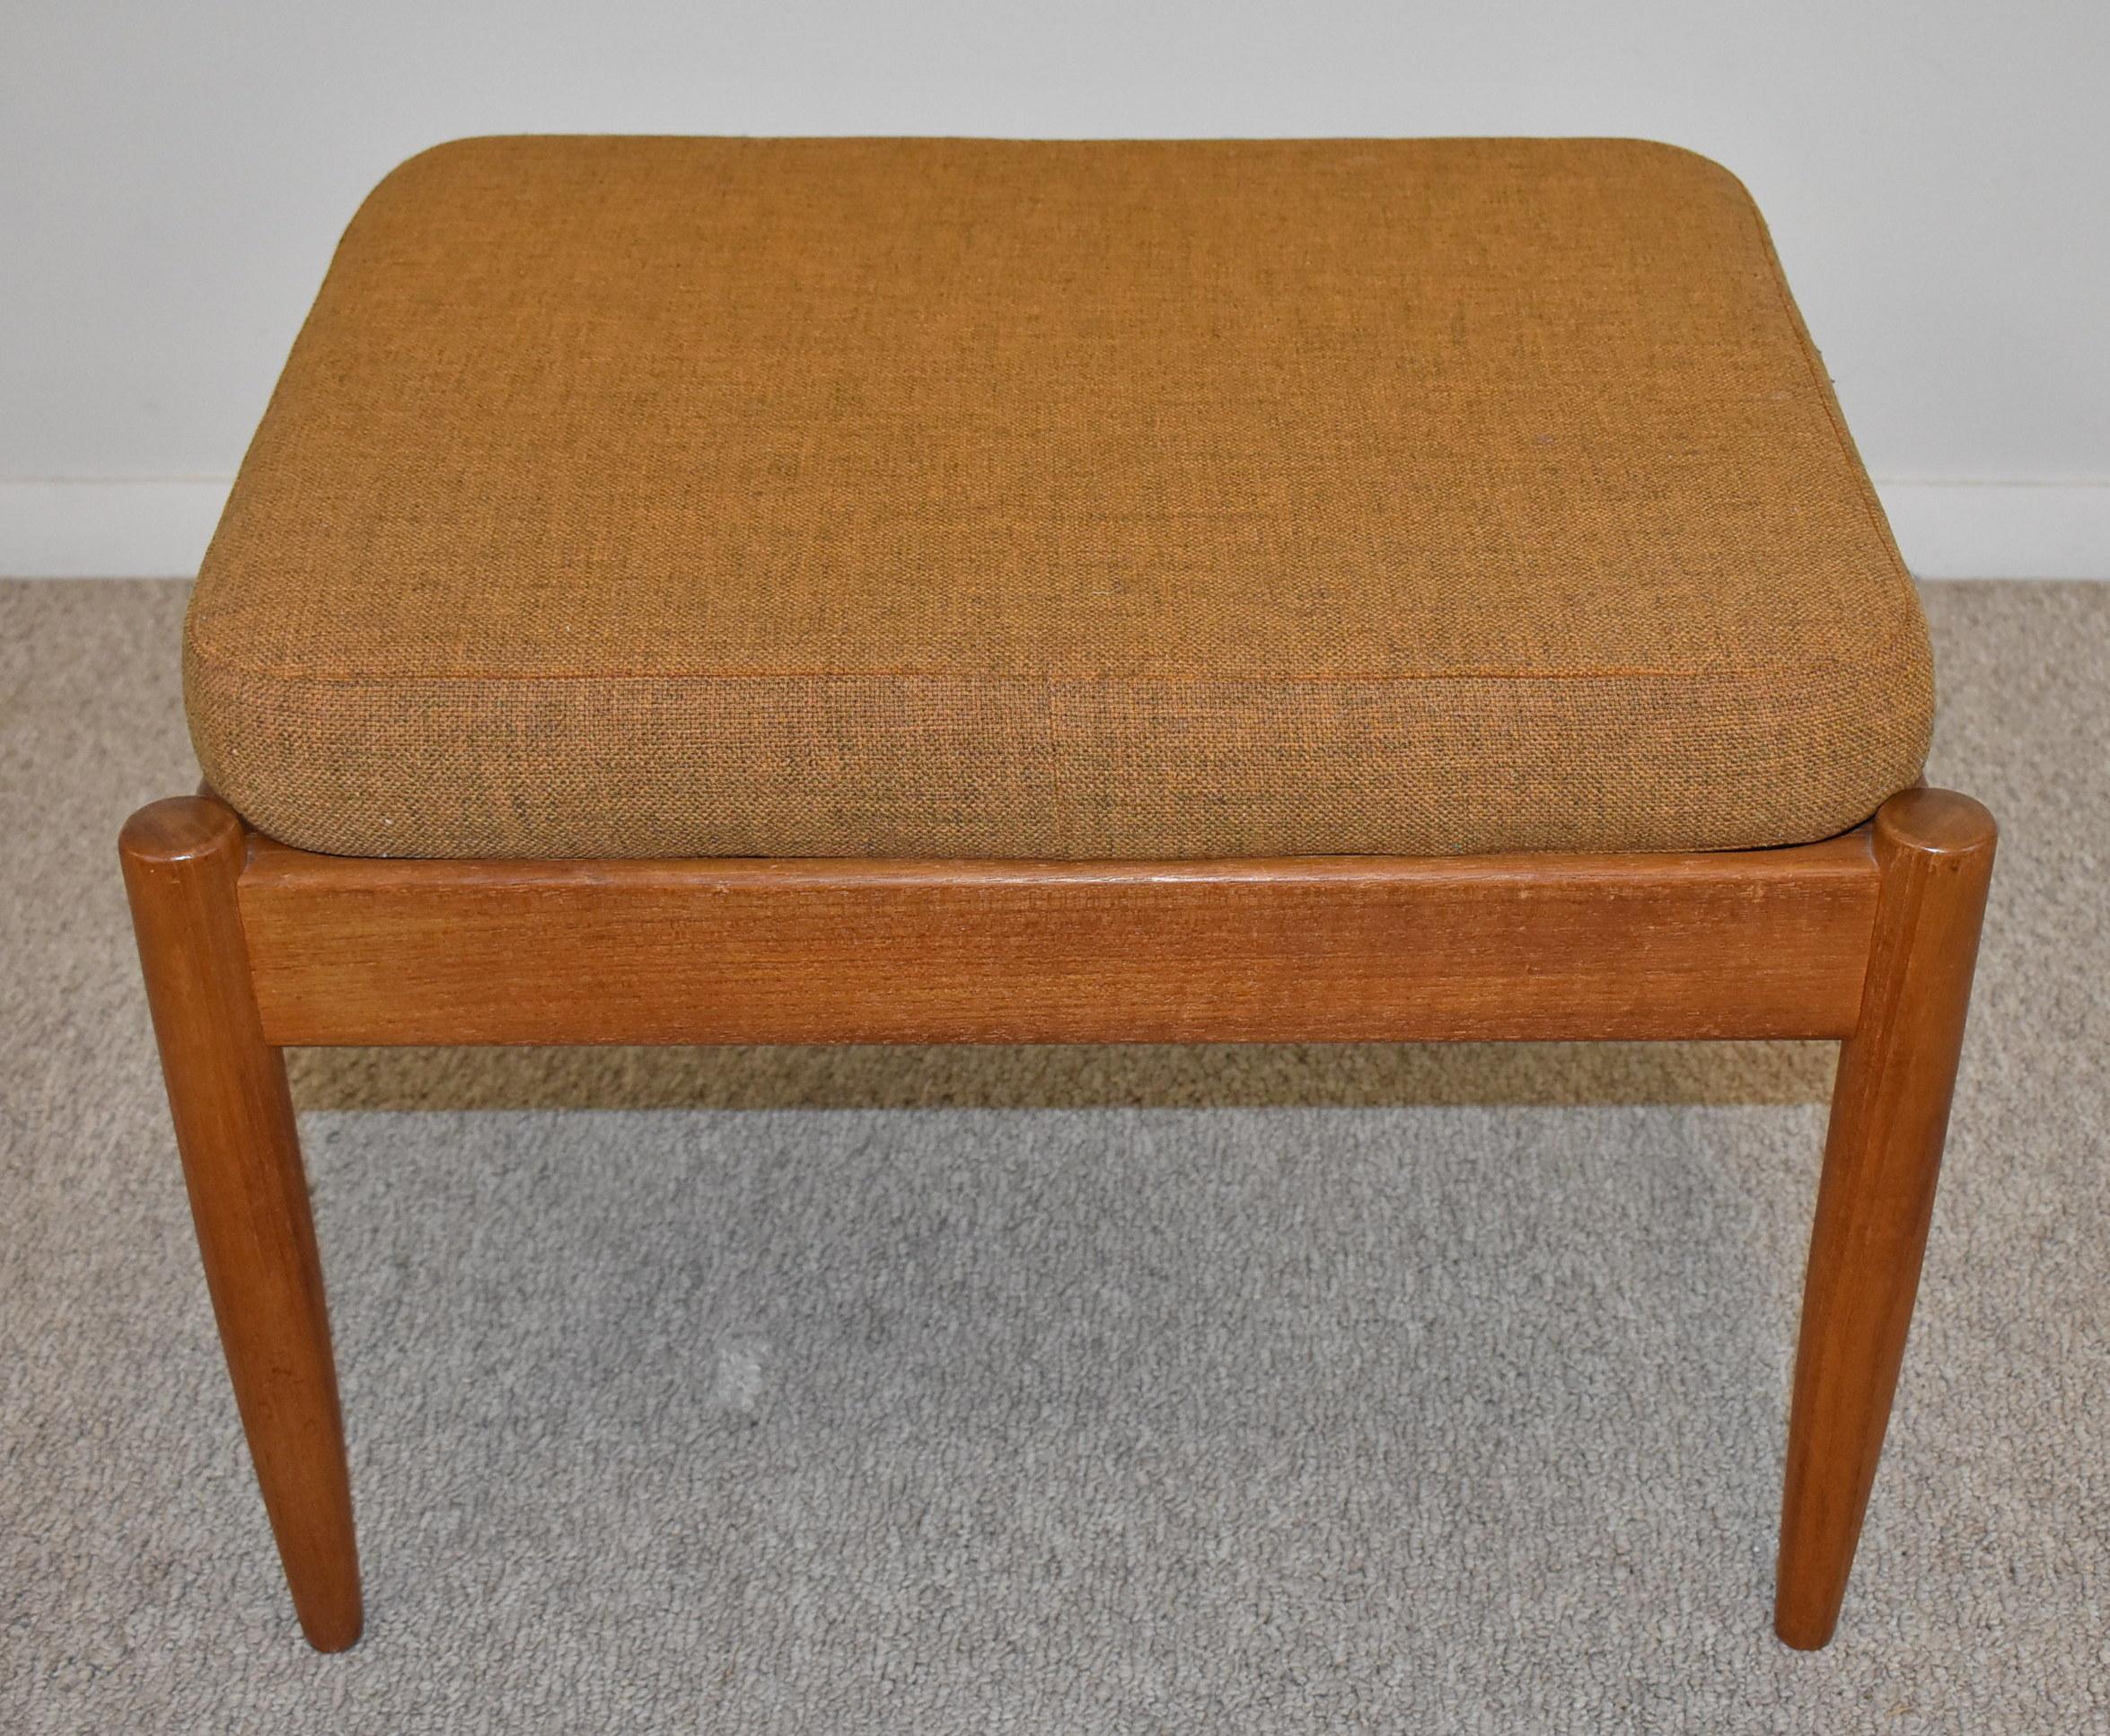 Danish Teak Foot Stool by Povl Dinesen, circa 1960s. Teak foot stoll distributed by Povl Dinesen Cabinetmaker. Silver Povl Dinesen sticker to the underside. Brown removeable cushion. Teak frame and tappered legs. Great condition. Dimensions: 16